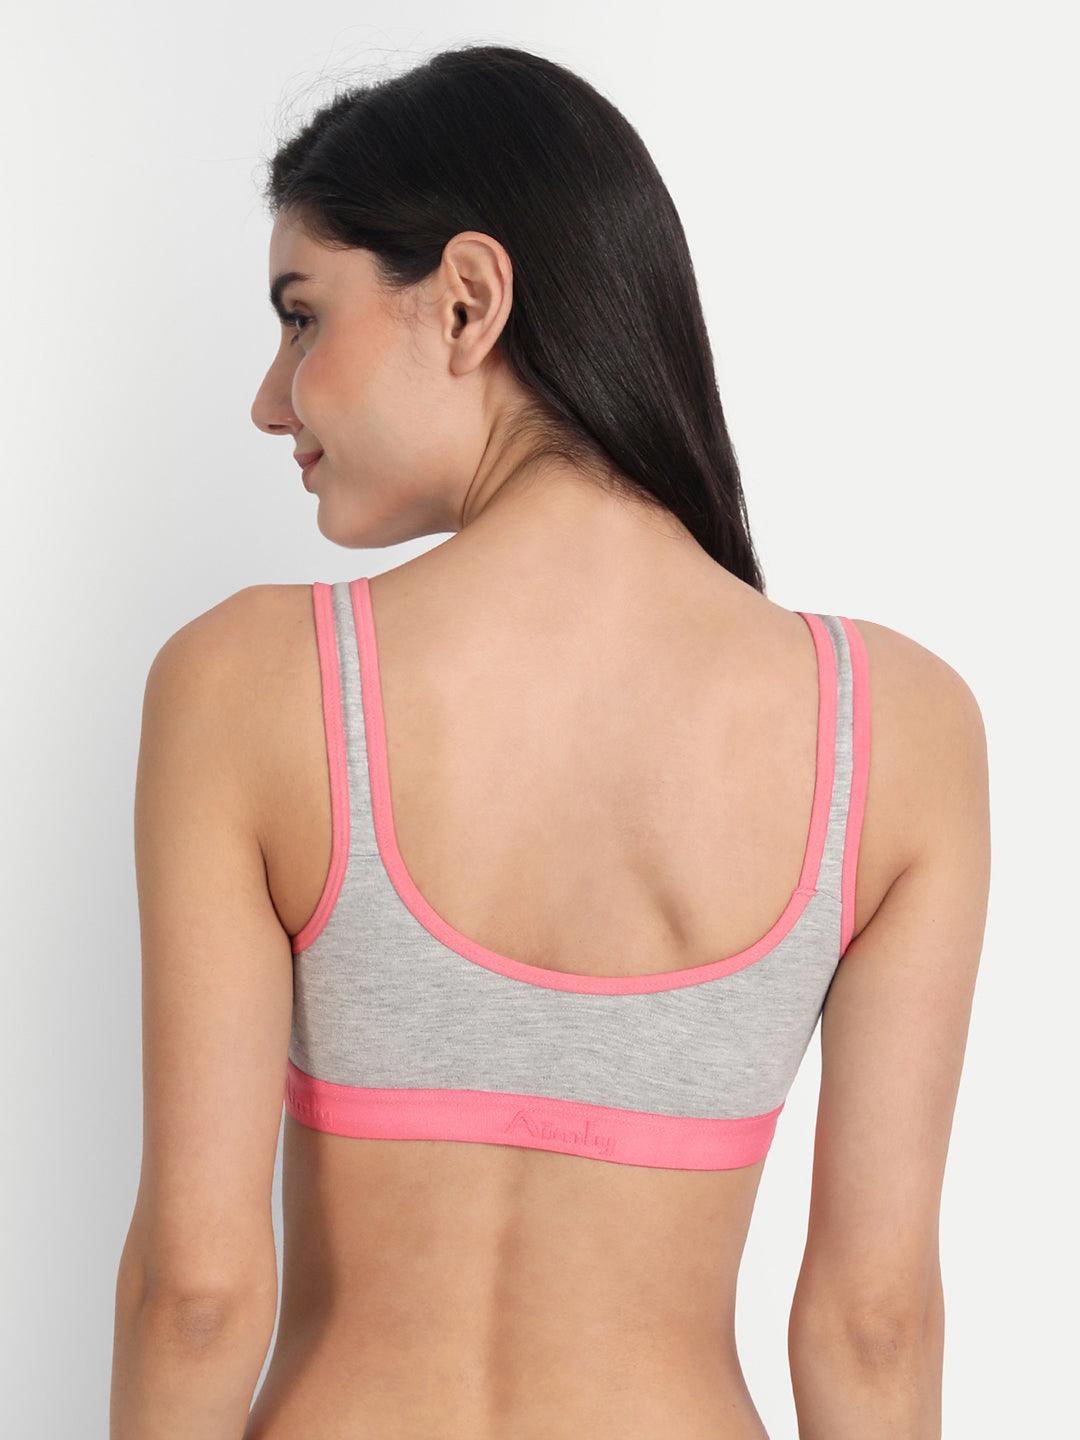 Women's Cotton with Lycra Non-Paded and Non-Wired Seamed Sports Bra for  Women/Girls